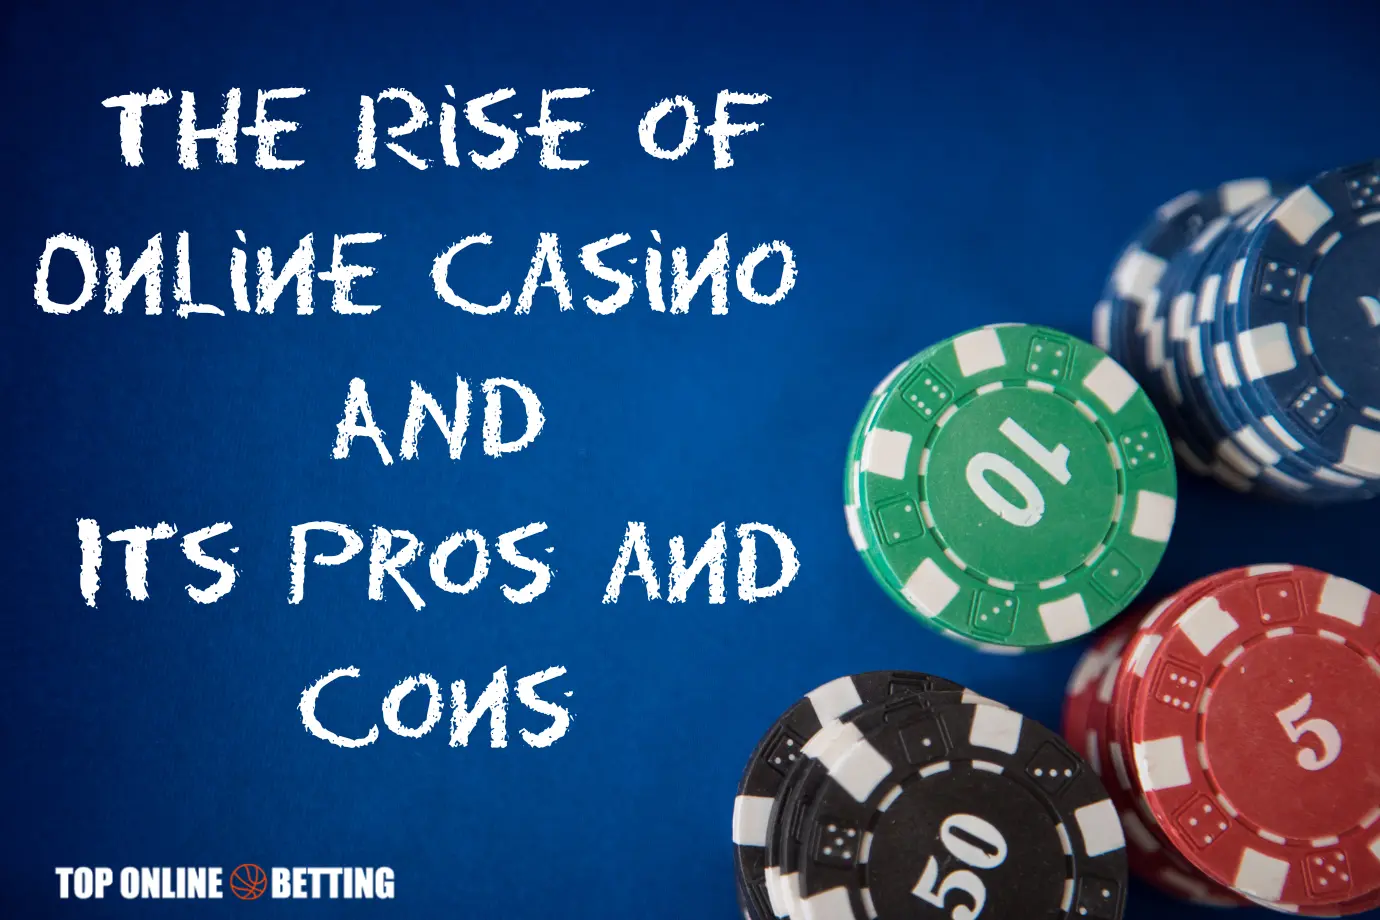 The Rise of Online Casino And Its pros and cons